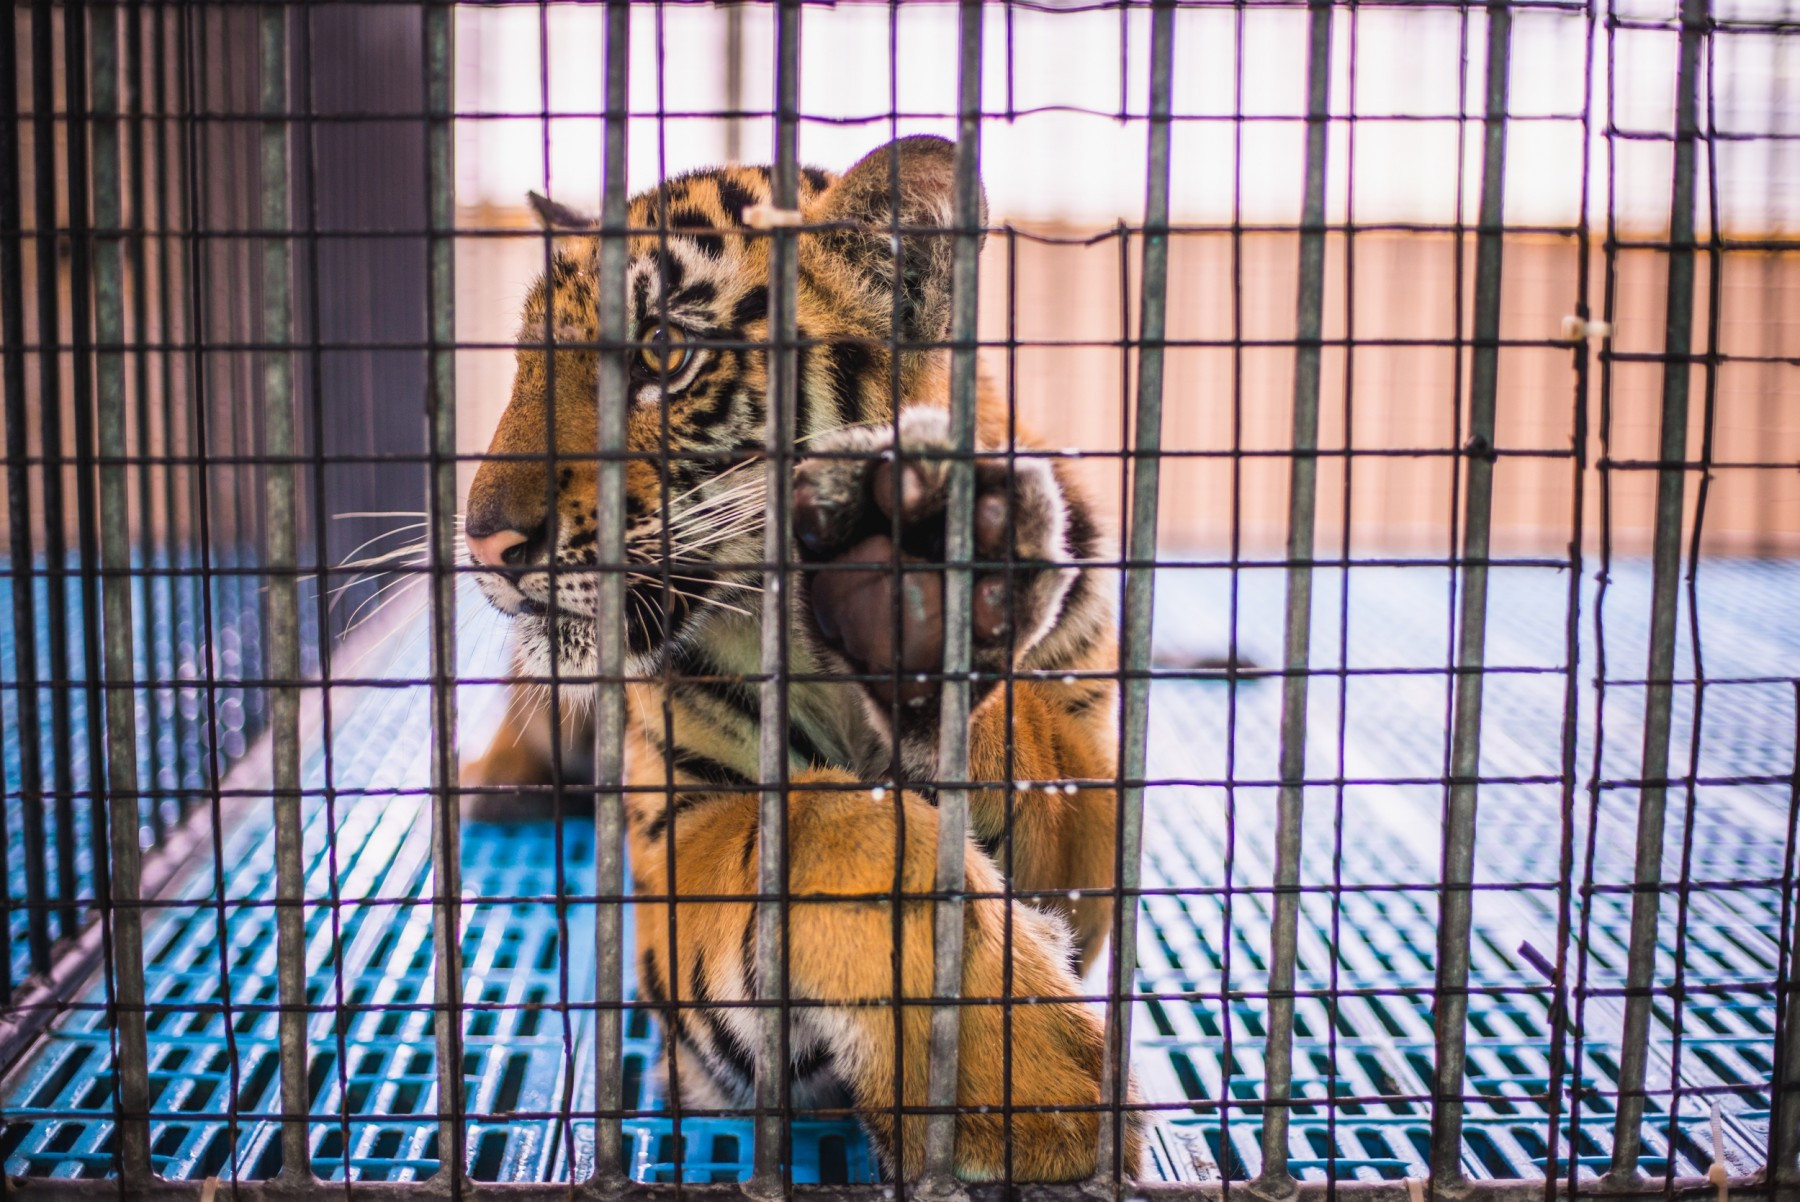 A captive tiger cub spends the entire day in this tiny cage.